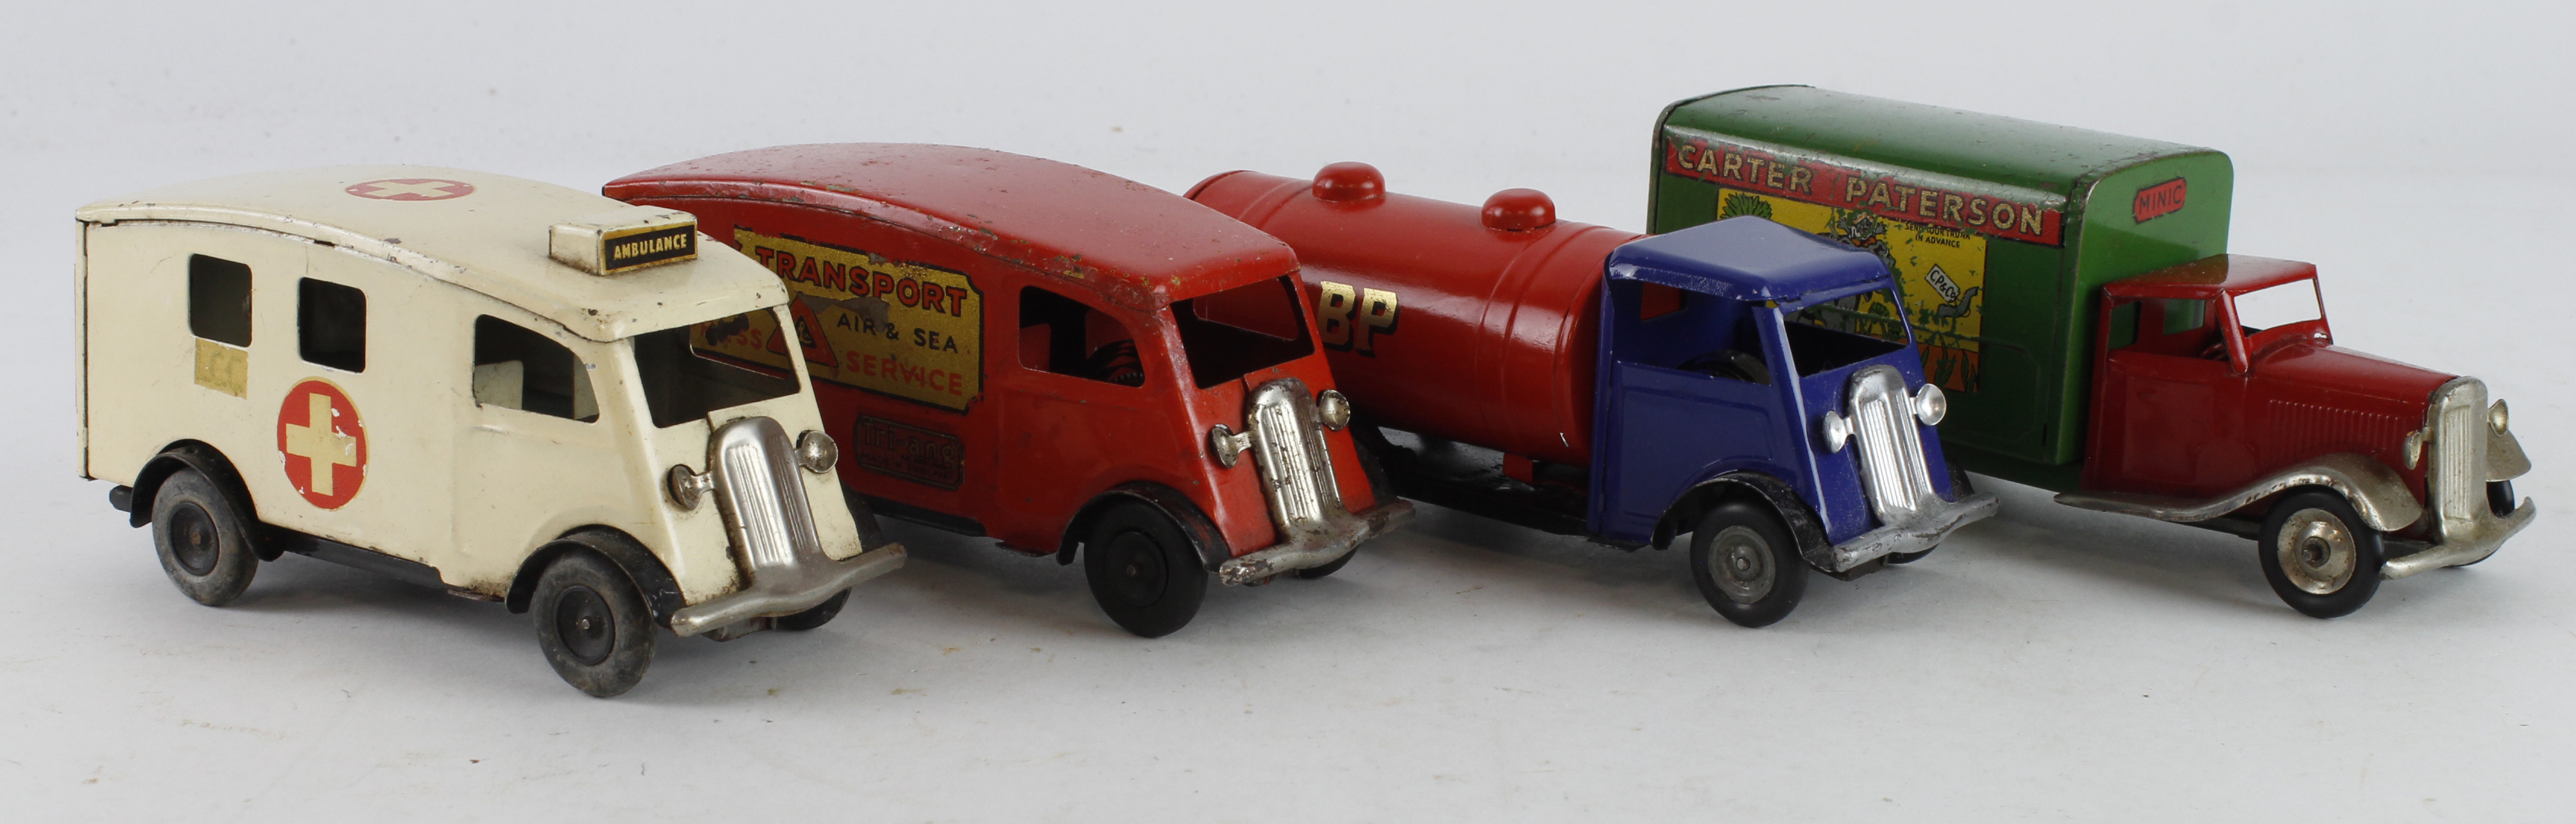 Triang Minic. Four Triang Minic tinplate clockwork lorries and vans, including Carter Paterson,